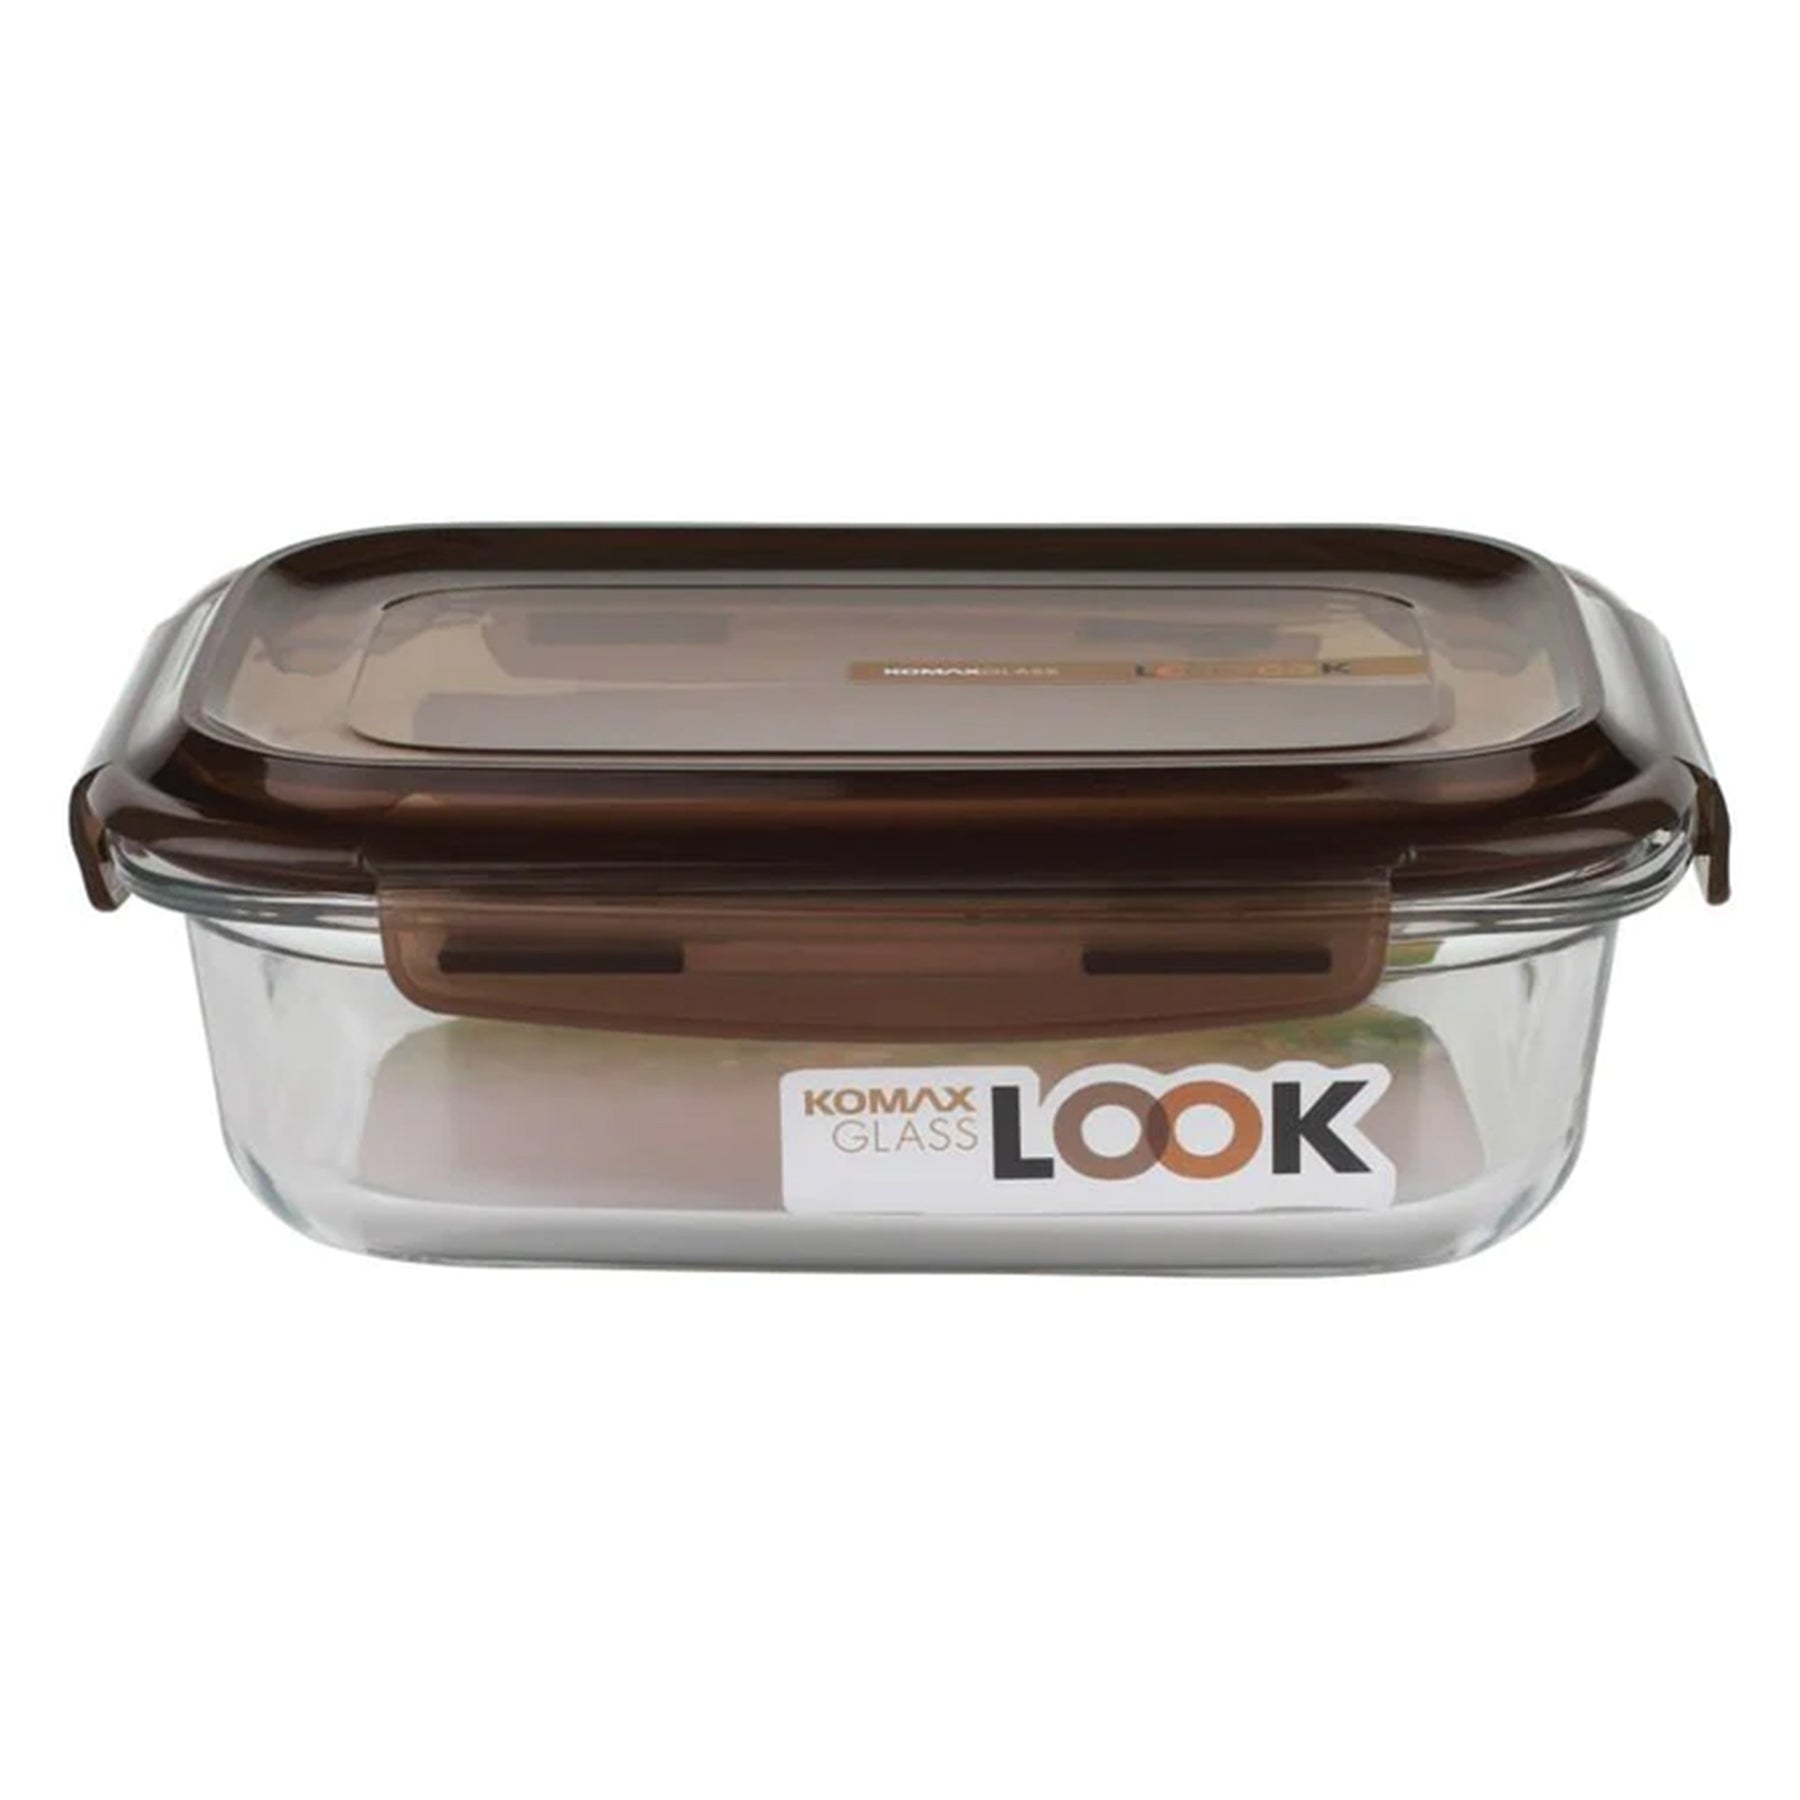 Sealable rectangular glass food storage container